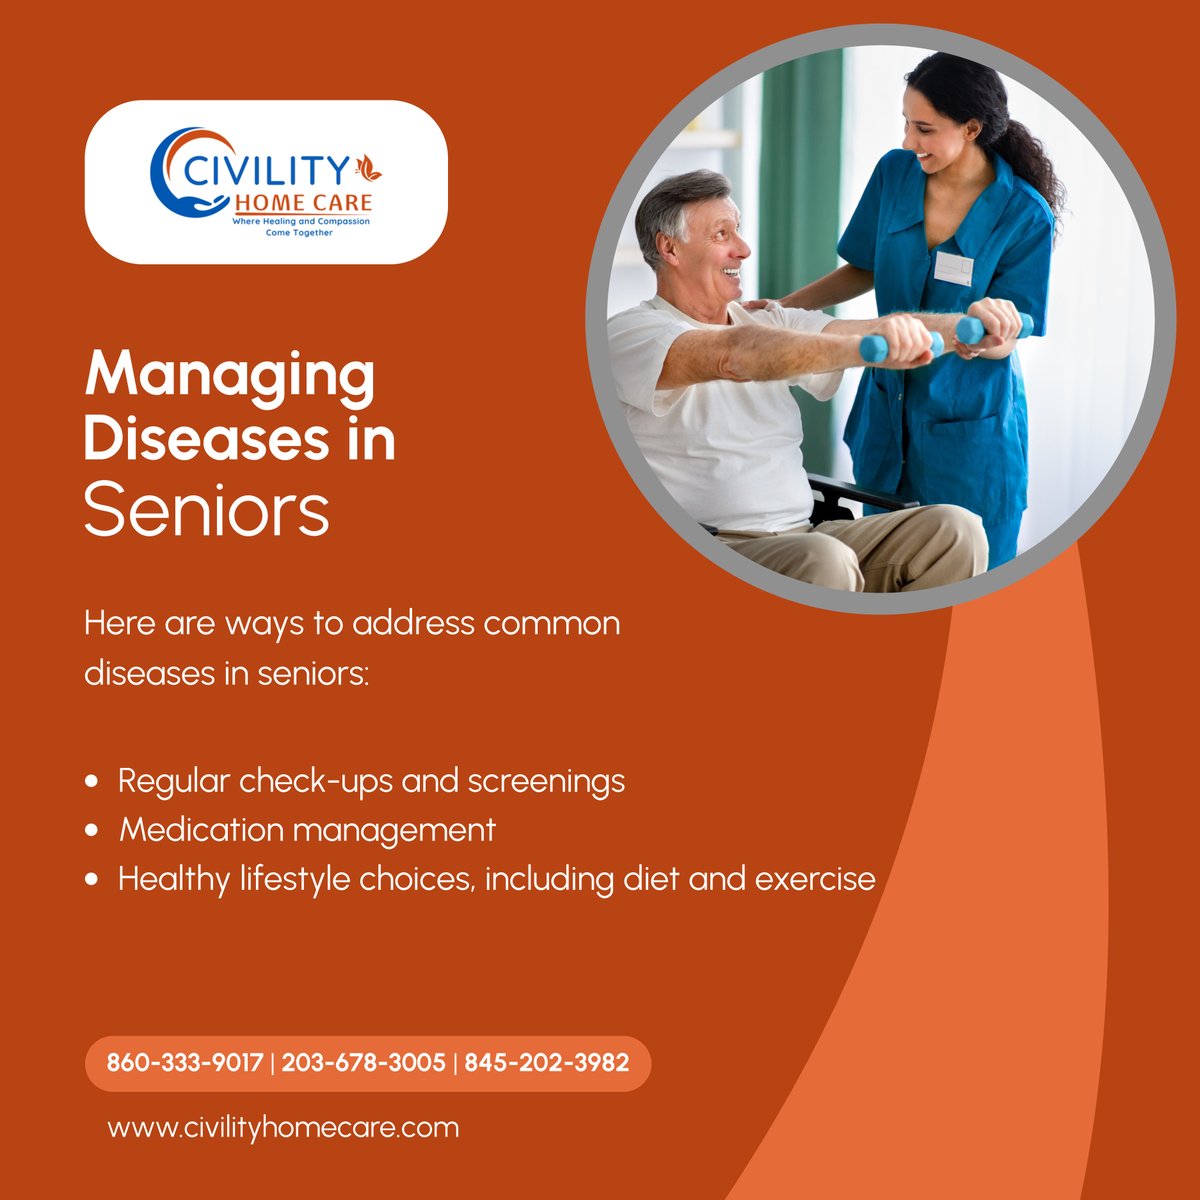 Proactive management of diseases in seniors promotes overall well-being and quality of life. Stay informed and take preventive measures. 

#NewingtonCT #HomeCareAndMedicalSupplies #SeniorHealth #DiseaseManagement #ProactiveManagement